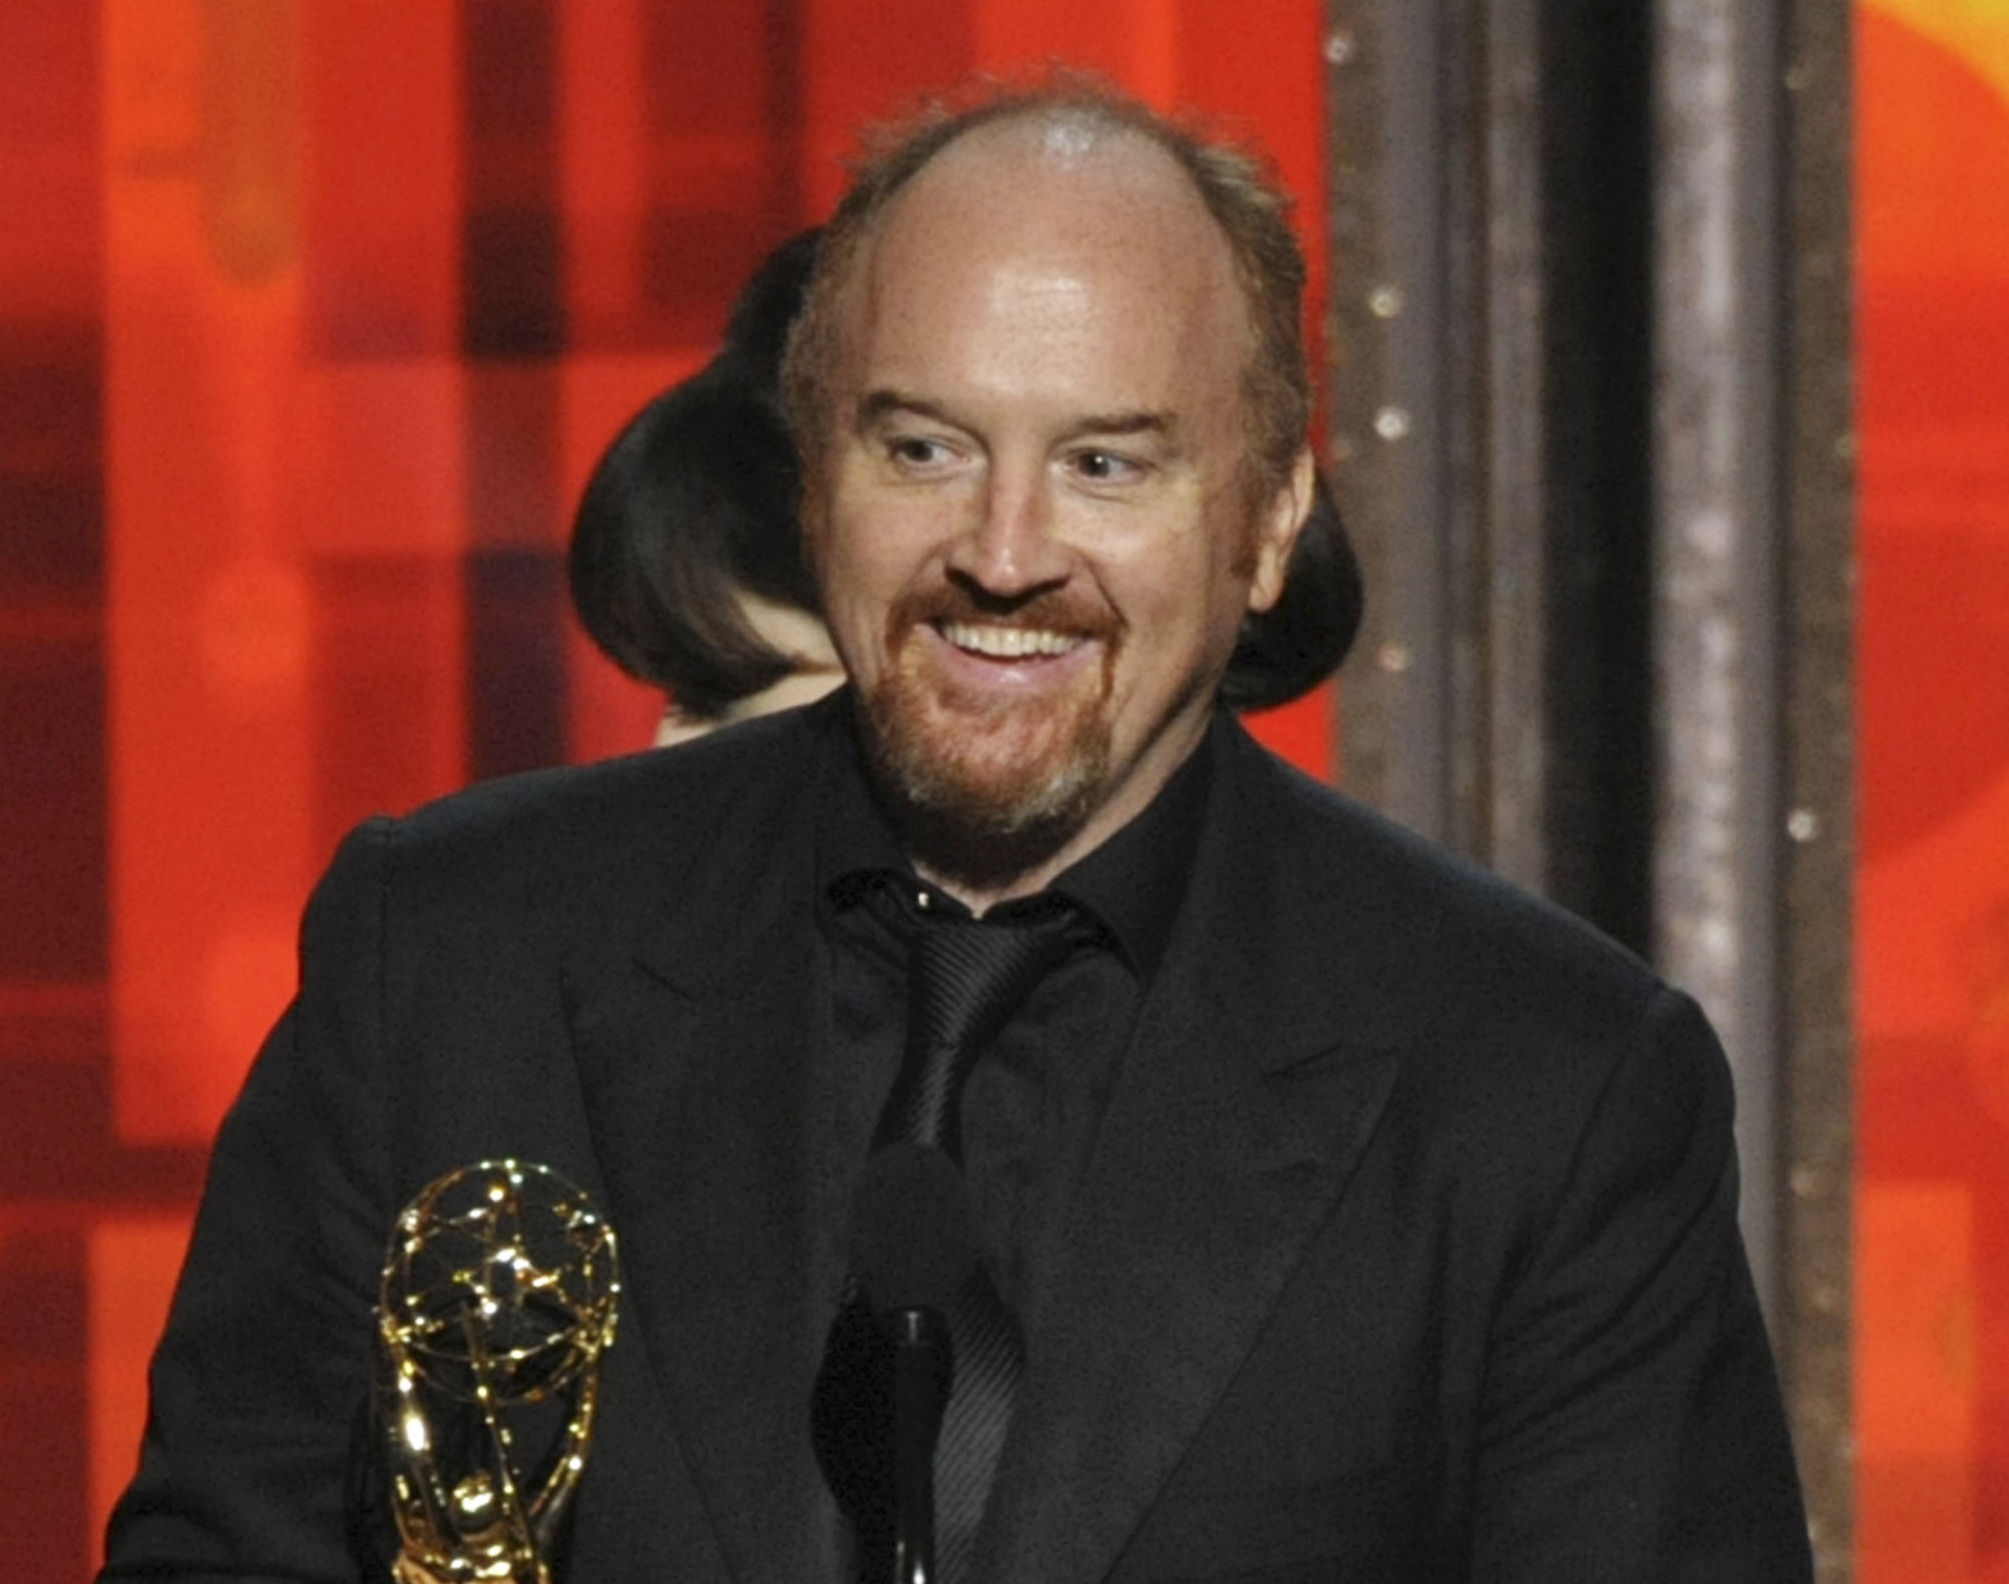 Rolling Stone names Louis C.K. as funniest person in show business - The Blade